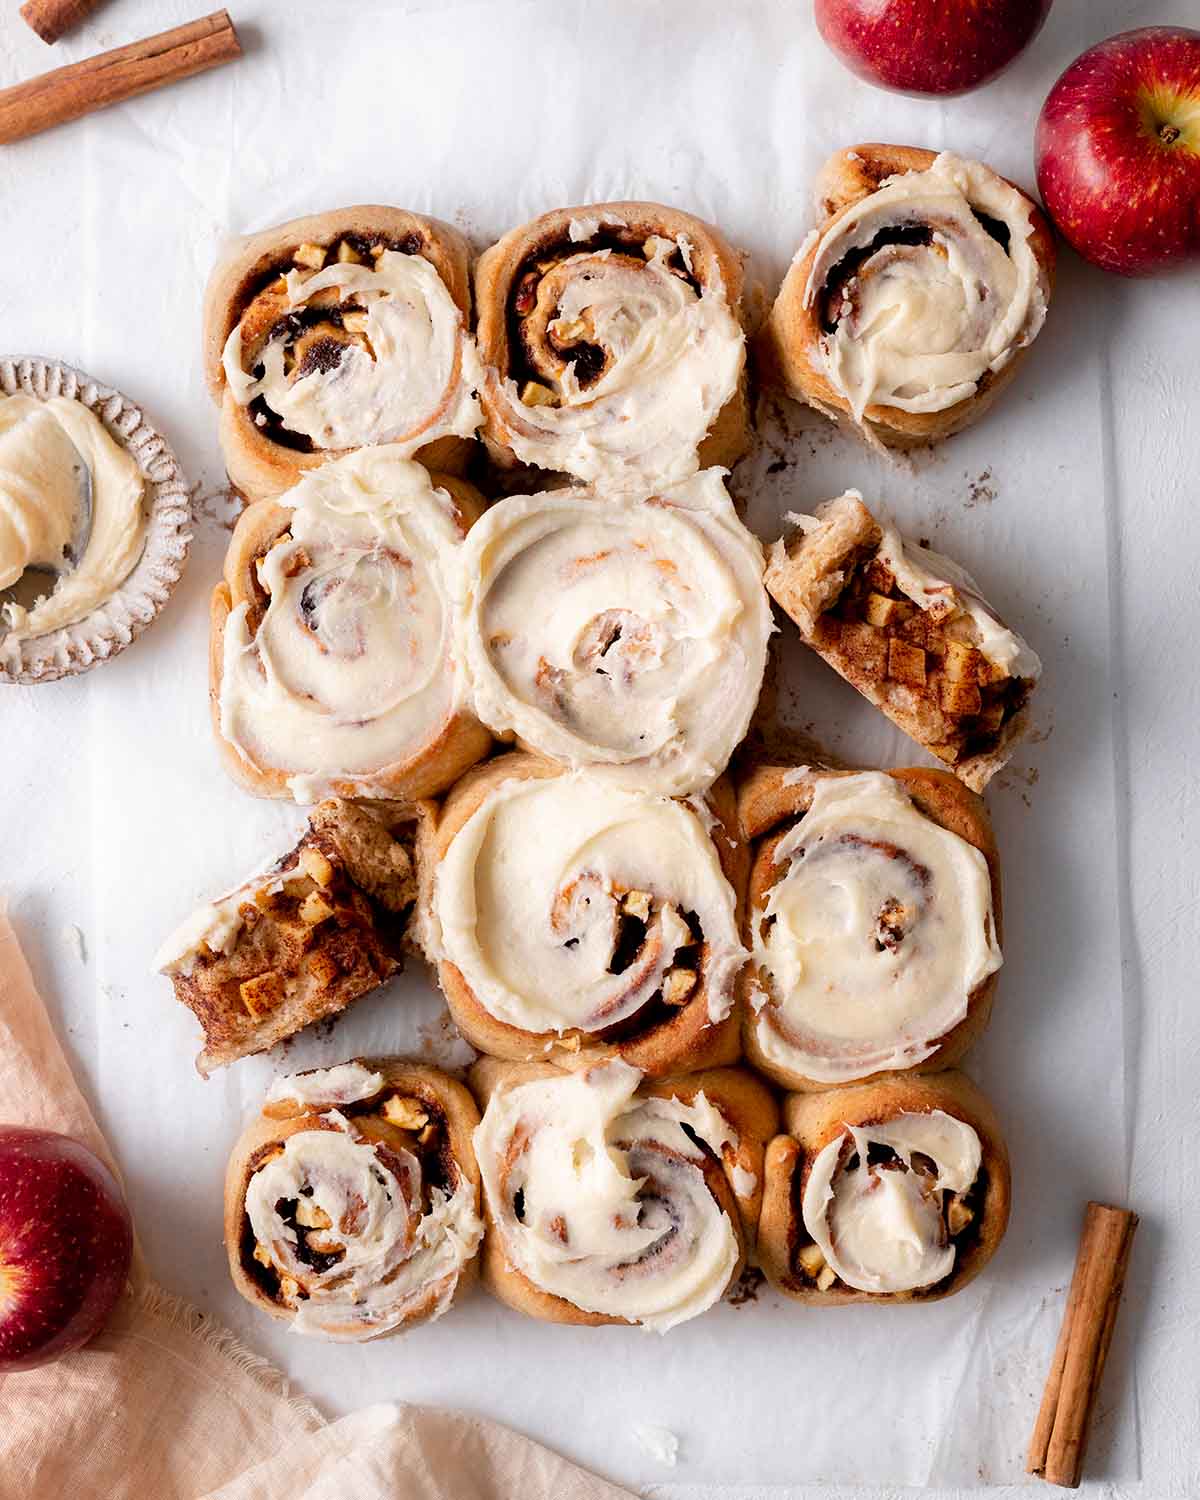 Flatlay of apple cinnamon rolls with some rolls on their side showing the apple cinnamon filling.